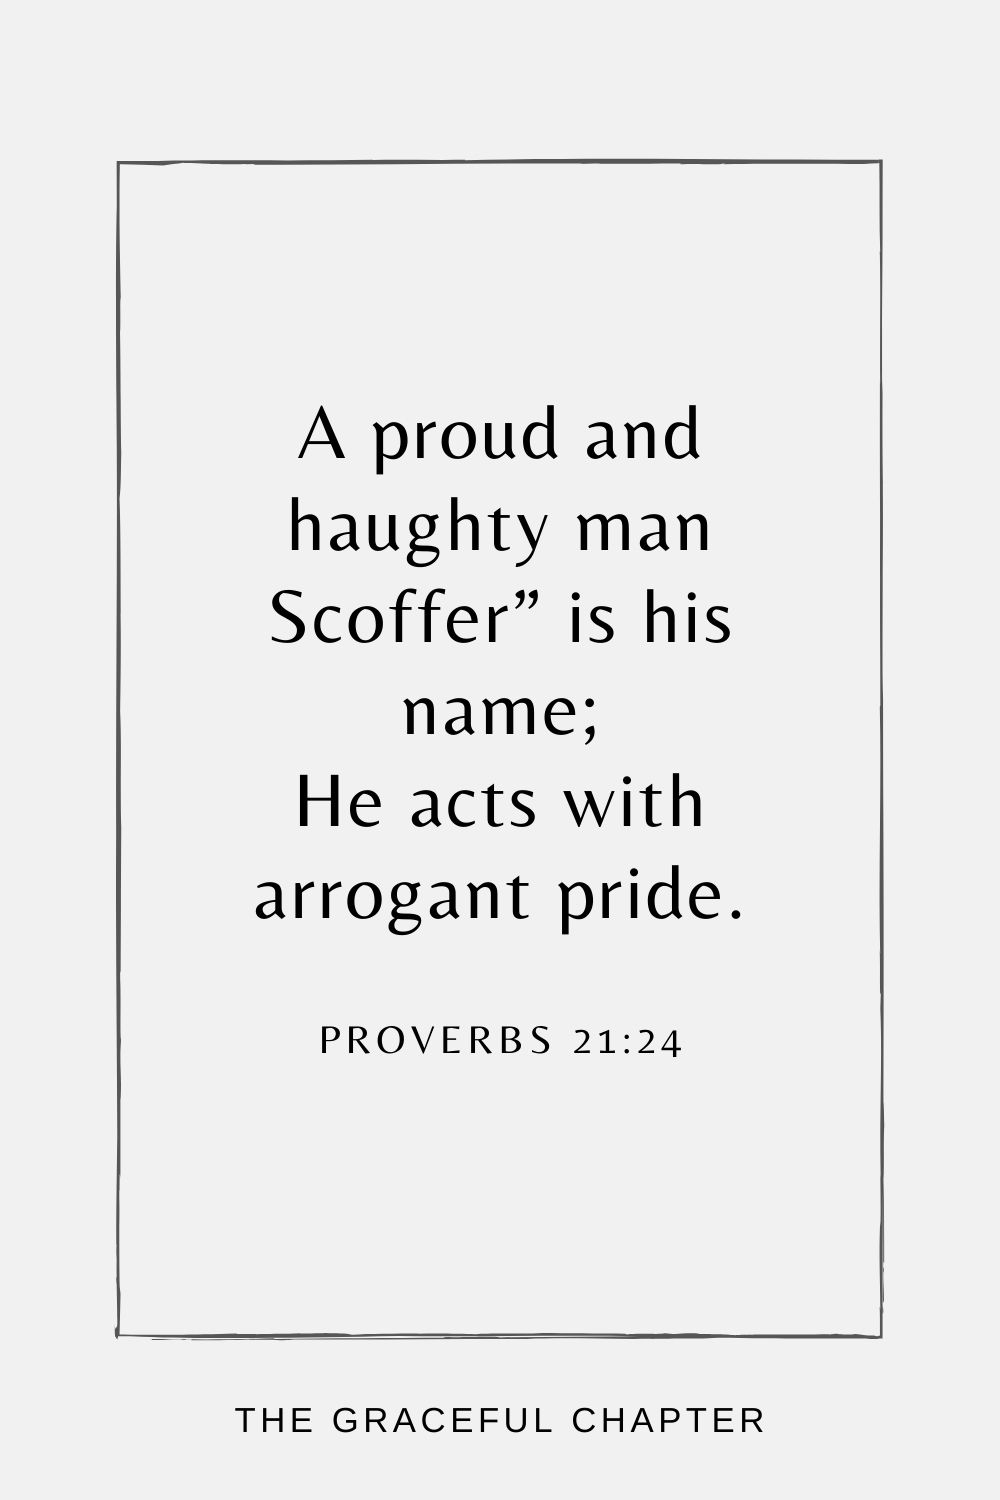 A proud and haughty man Scoffer” is his name; He acts with arrogant pride. Proverbs 21:24